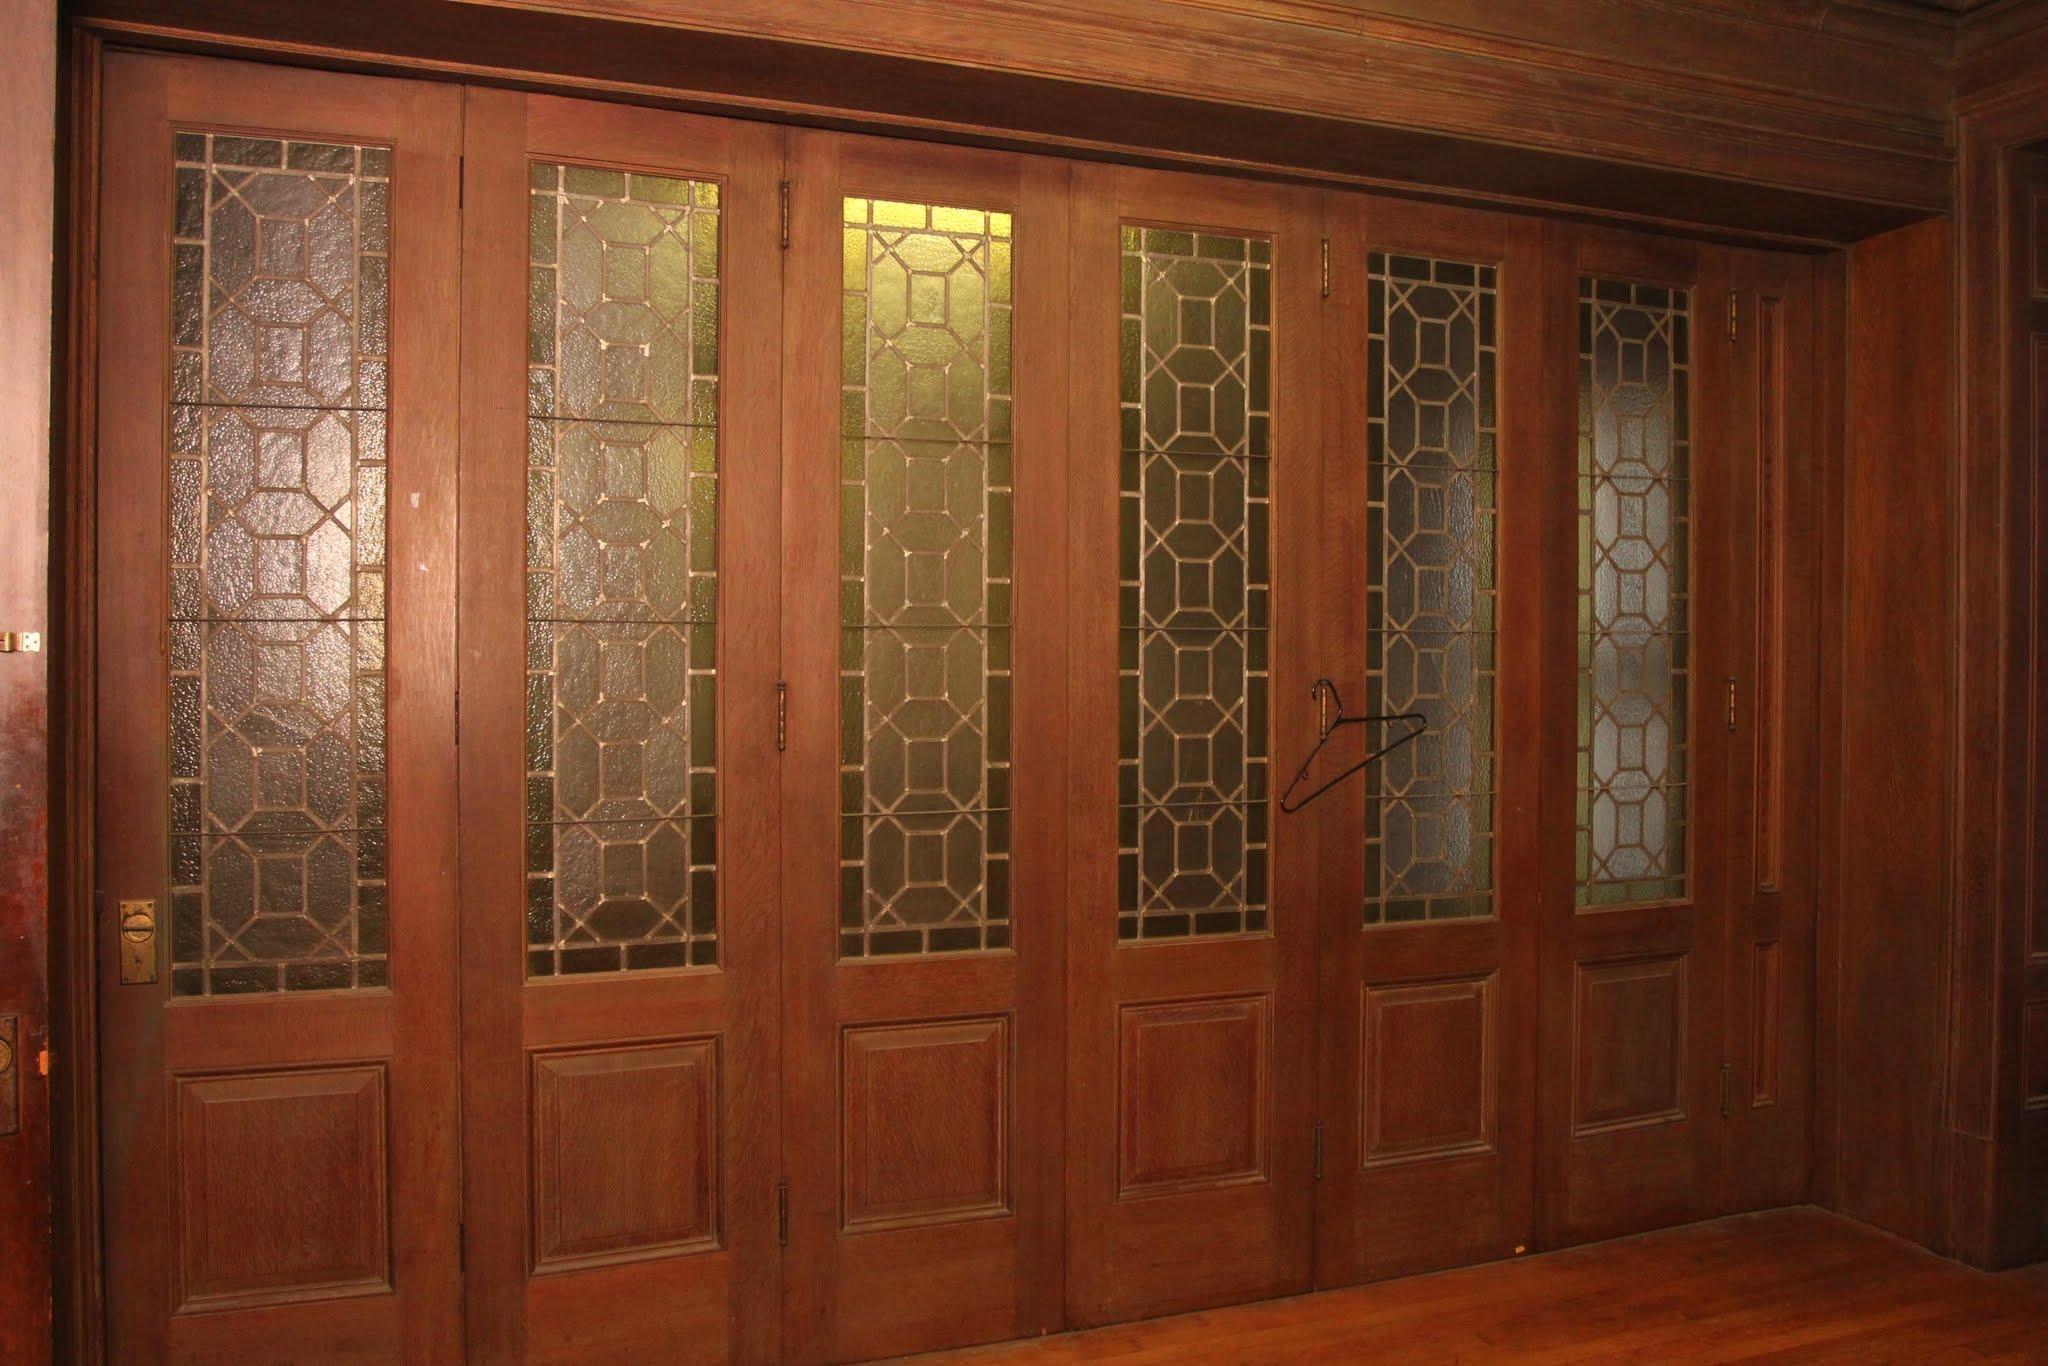 1907 Bifold Stained Glass Doors from Madison Avenue Baptist Church Parish House 4